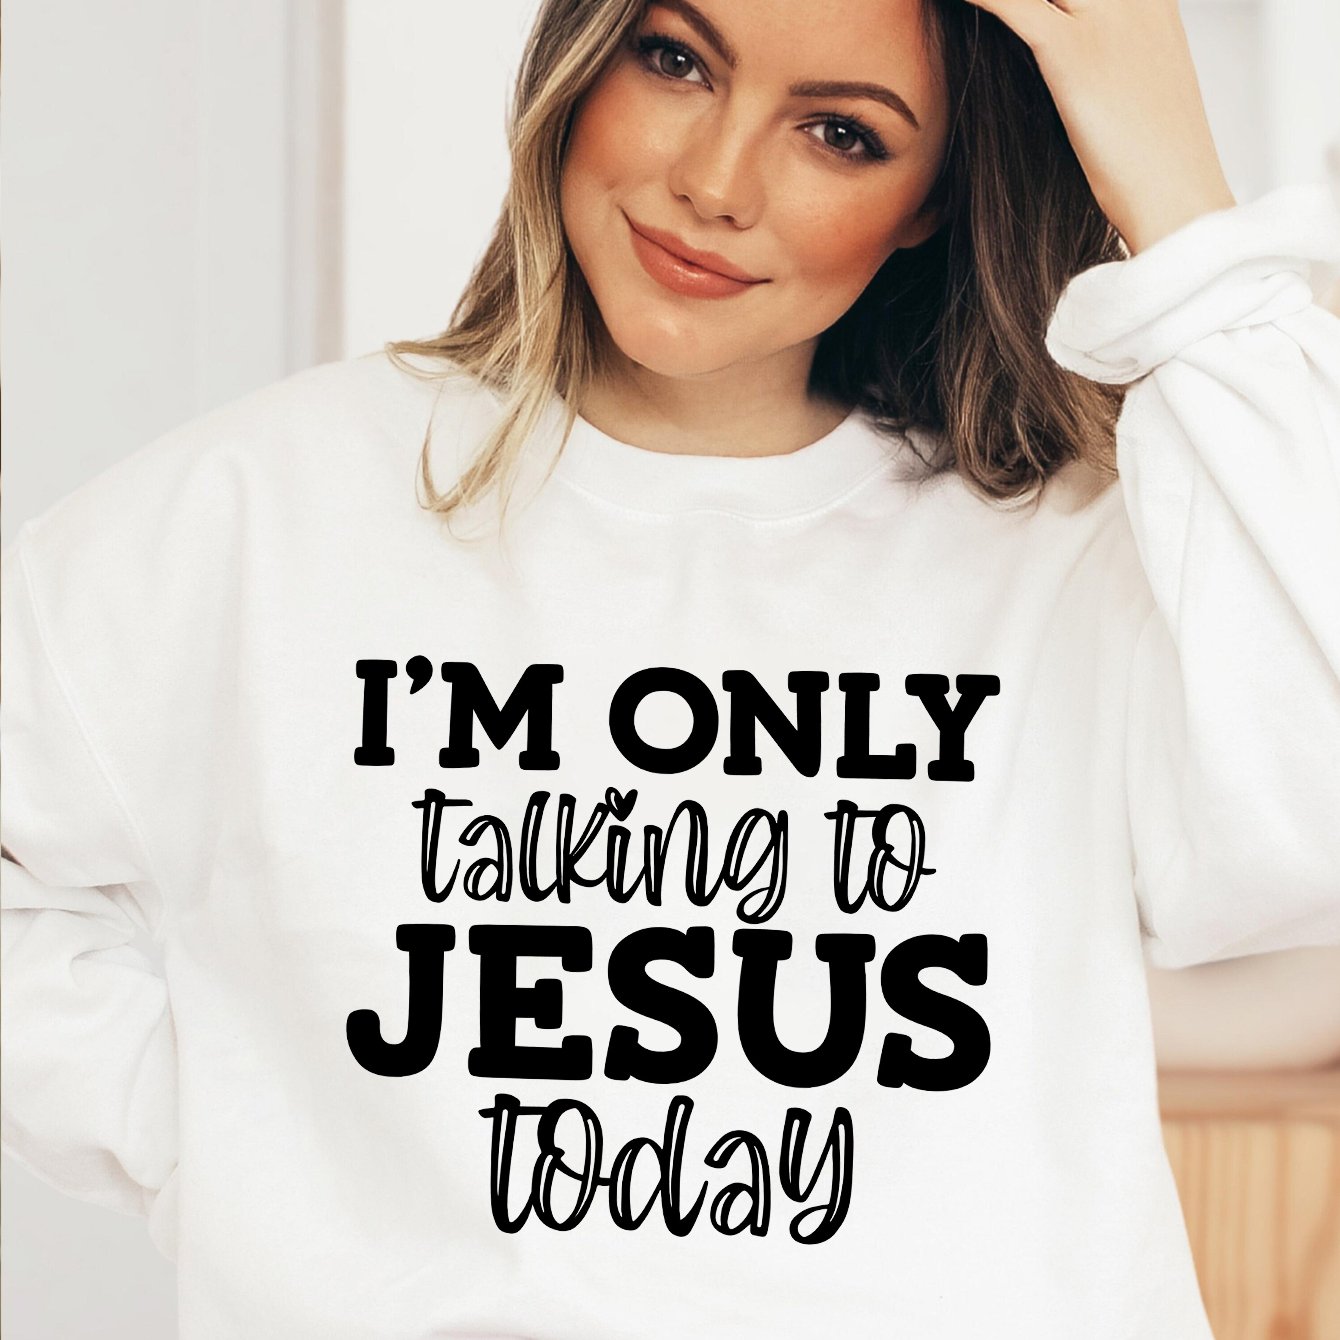 I'm Only Talking To Jesus Today Women's Christian Pullover Sweatshirt claimedbygoddesigns